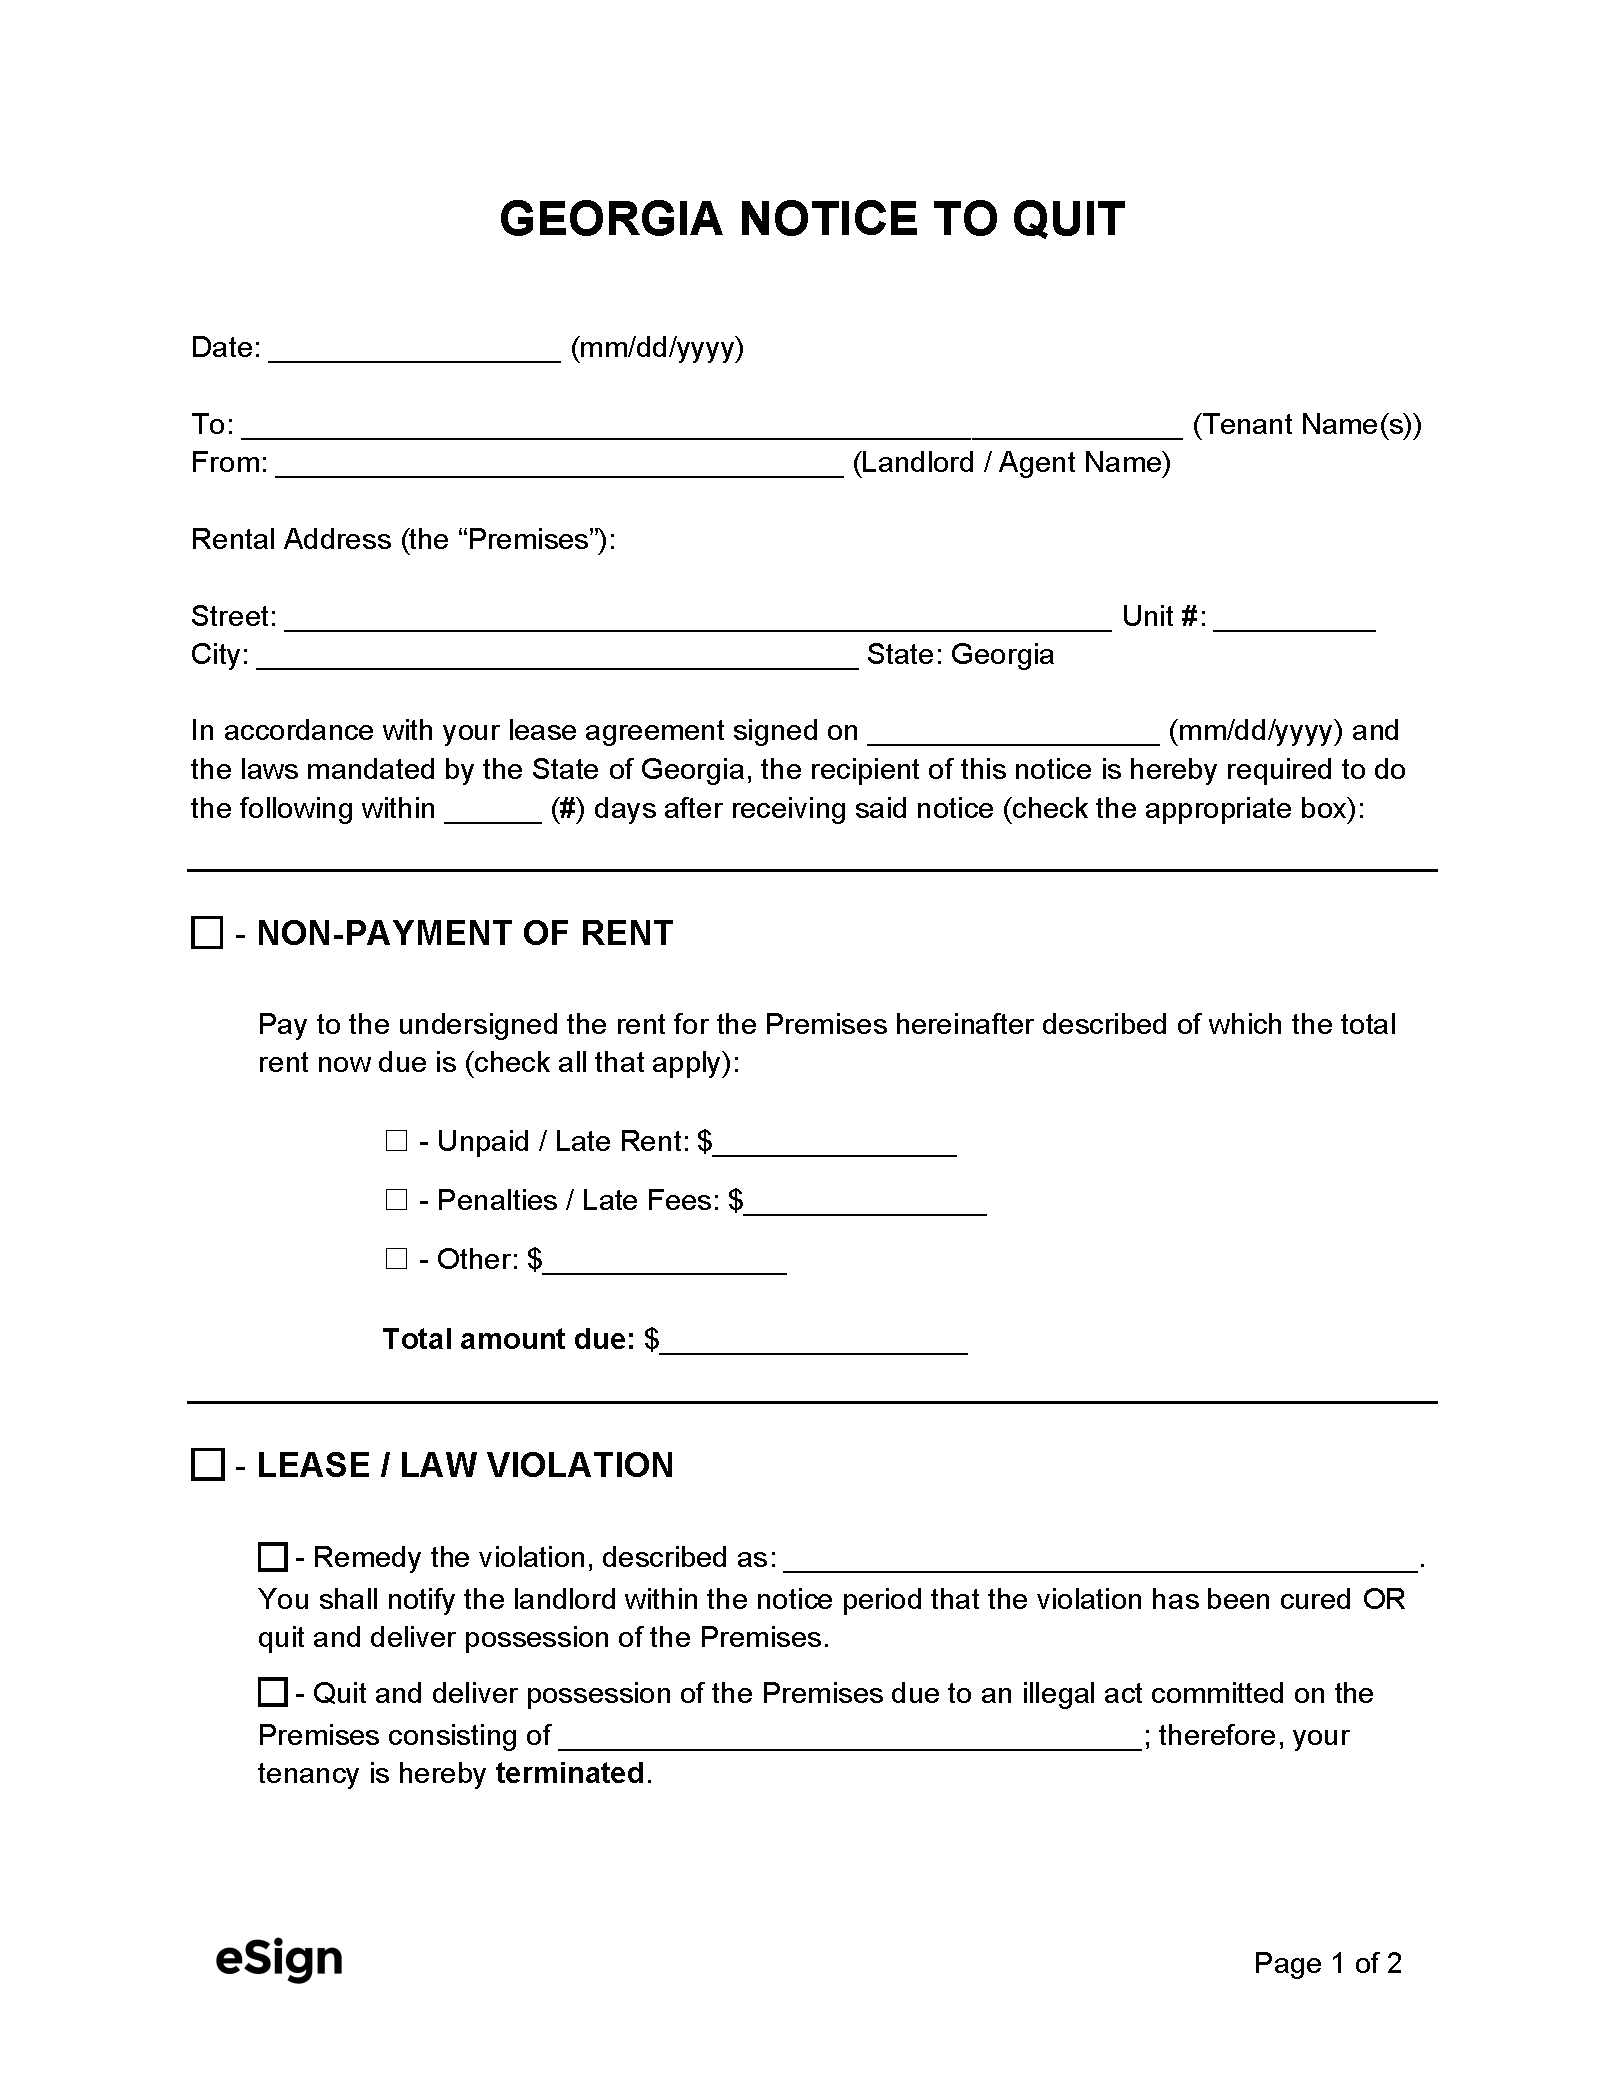 30 day eviction notice form template illinois